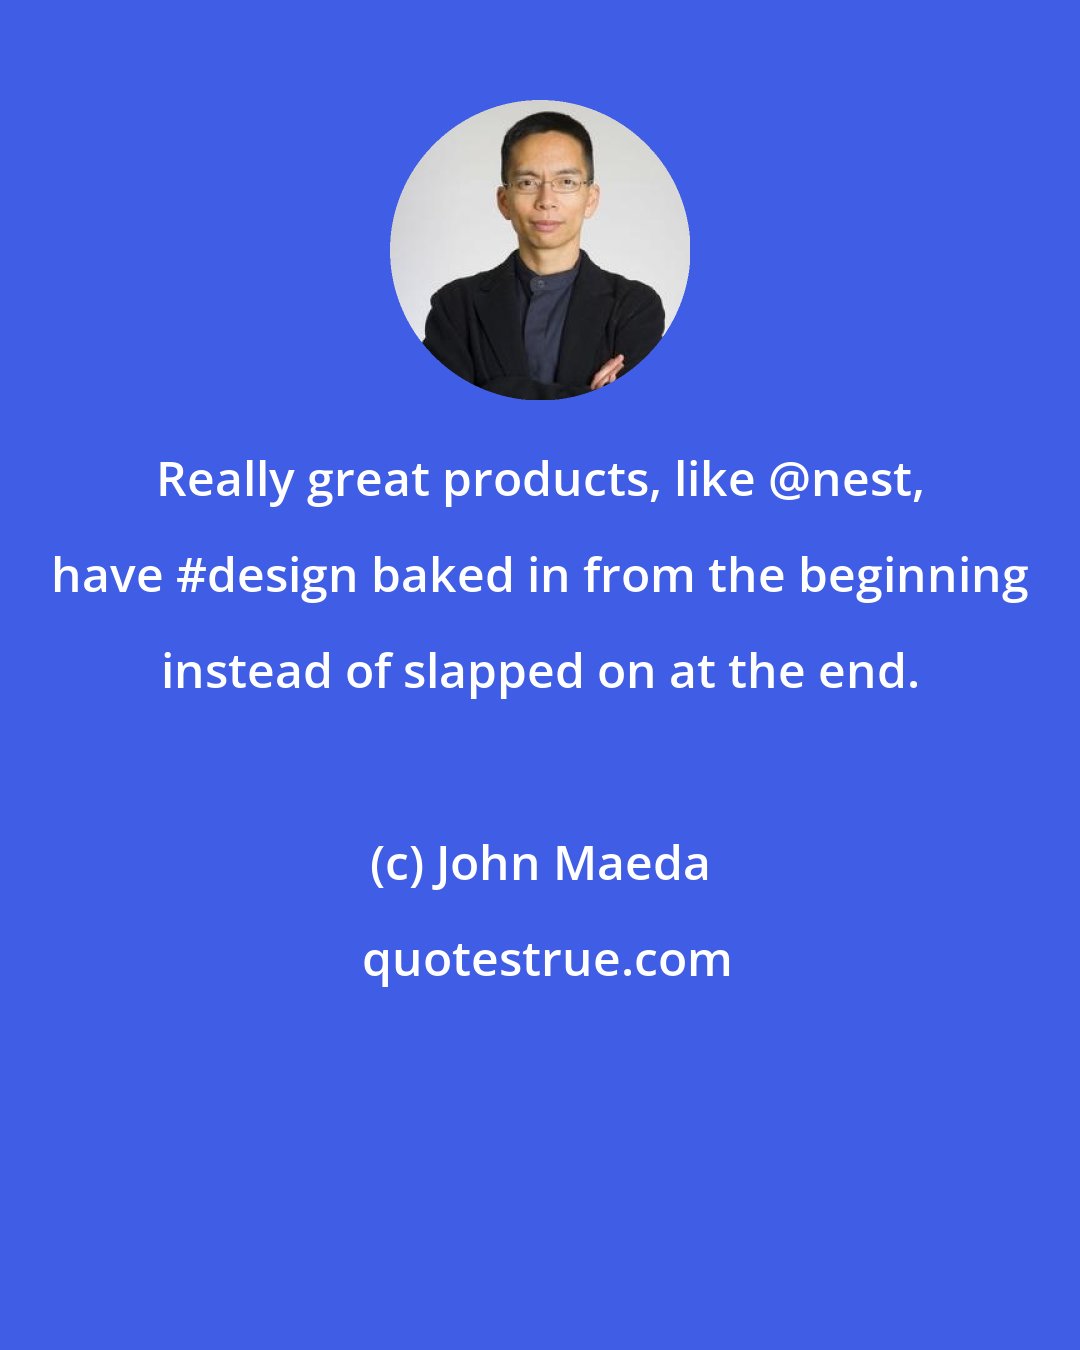 John Maeda: Really great products, like @nest, have #design baked in from the beginning instead of slapped on at the end.